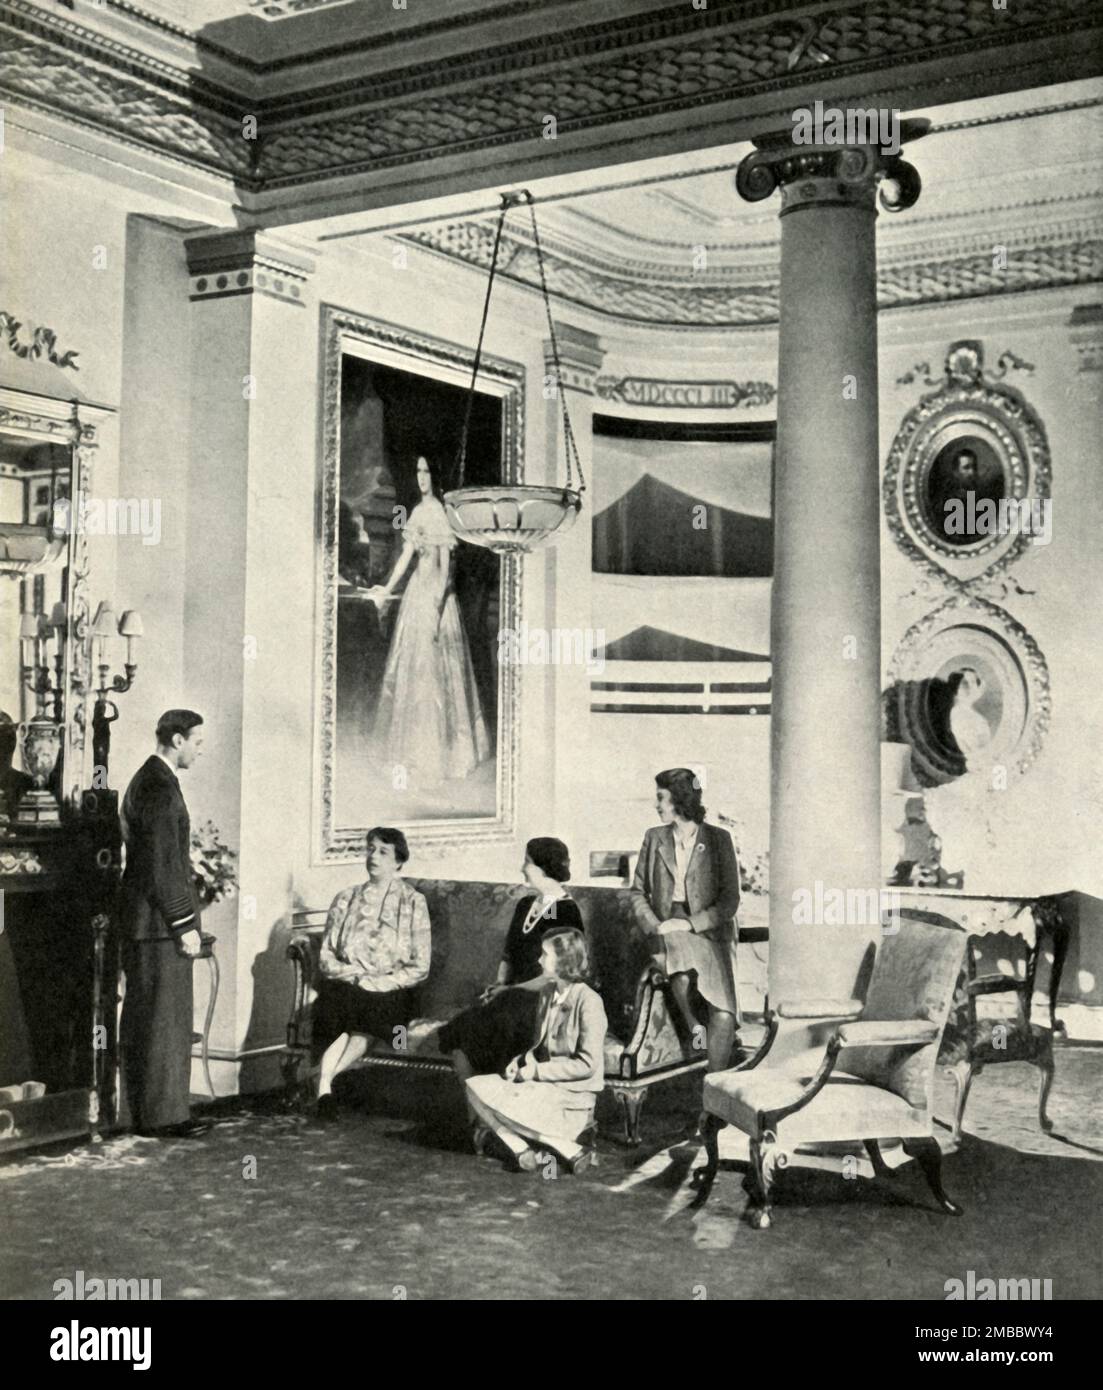 'Mrs. Roosevelt at the Palace', October 1942, (1947). King George VI and Queen Elizabeth with daughters Princess Elizabeth (future Queen Elizabeth II) and Princess Margaret Rose, with US First Lady Eleanor Roosevelt in the Bow Room at Buckingham Palace. From &quot;Princess Elizabeth: The Illustrated Story of Twenty-one Years in the Life of the Heir Presumptive&quot;, by Dermot Morrah. [Odhams Press Limited, London, 1947] Stock Photo